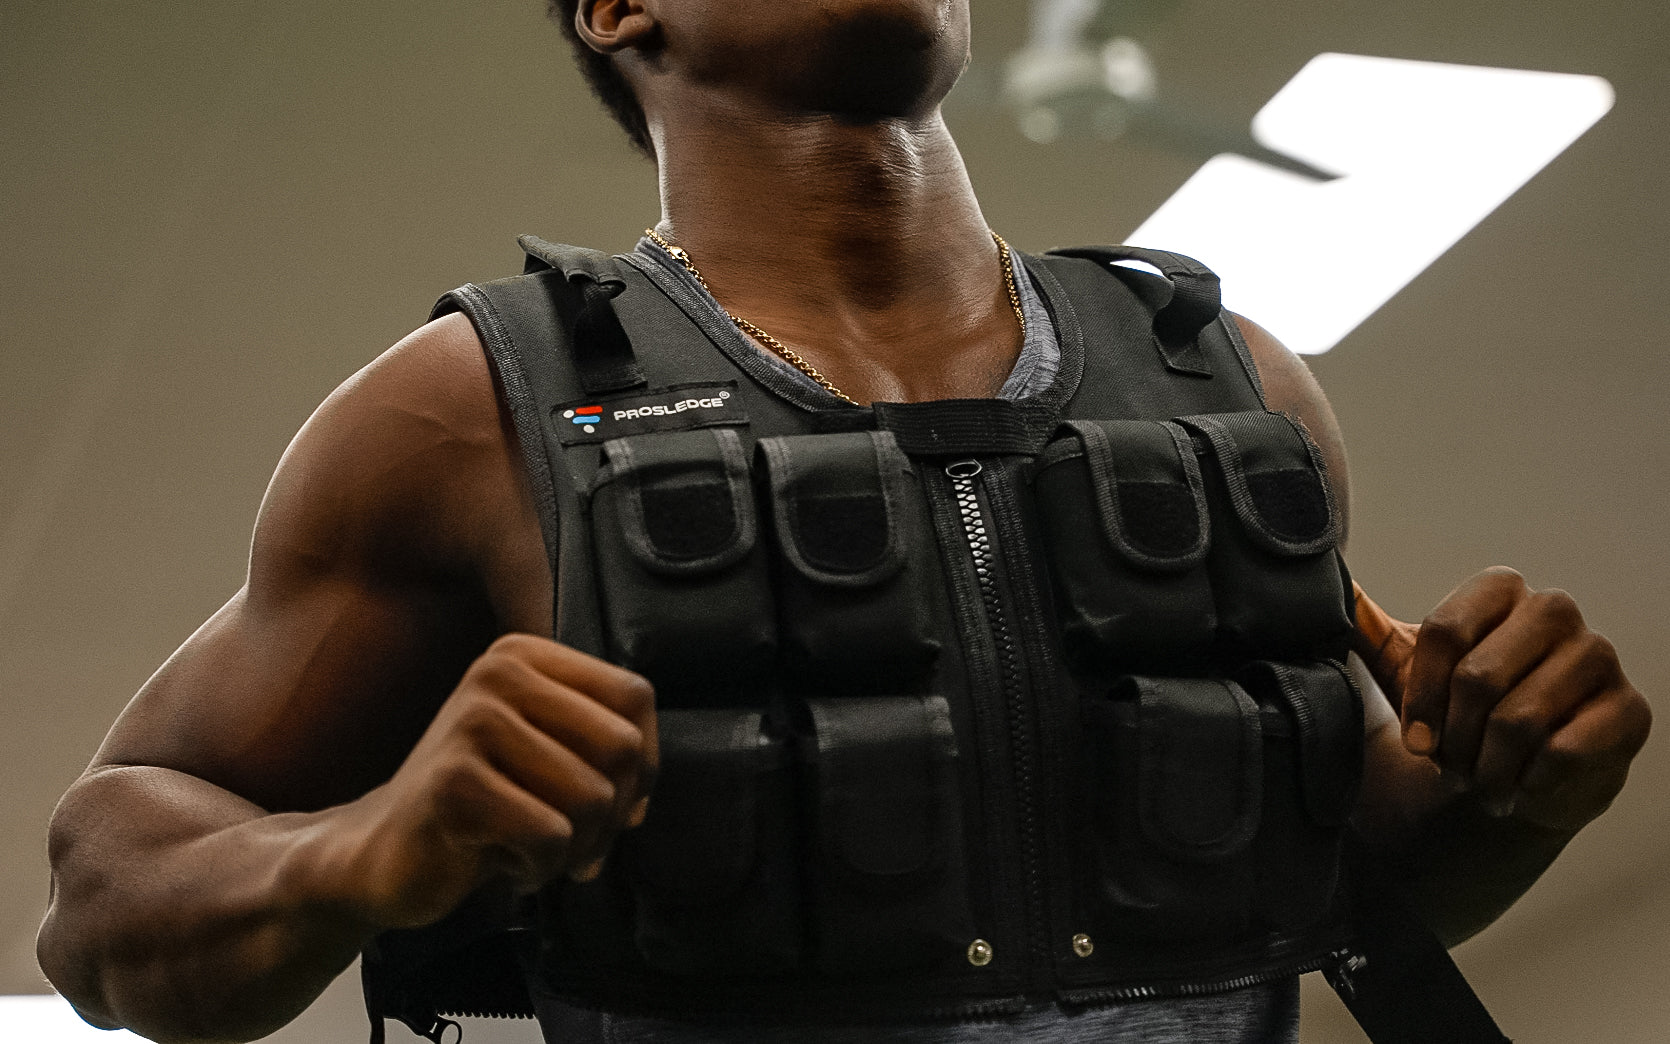 The top workouts with the ProSledge weighted vest